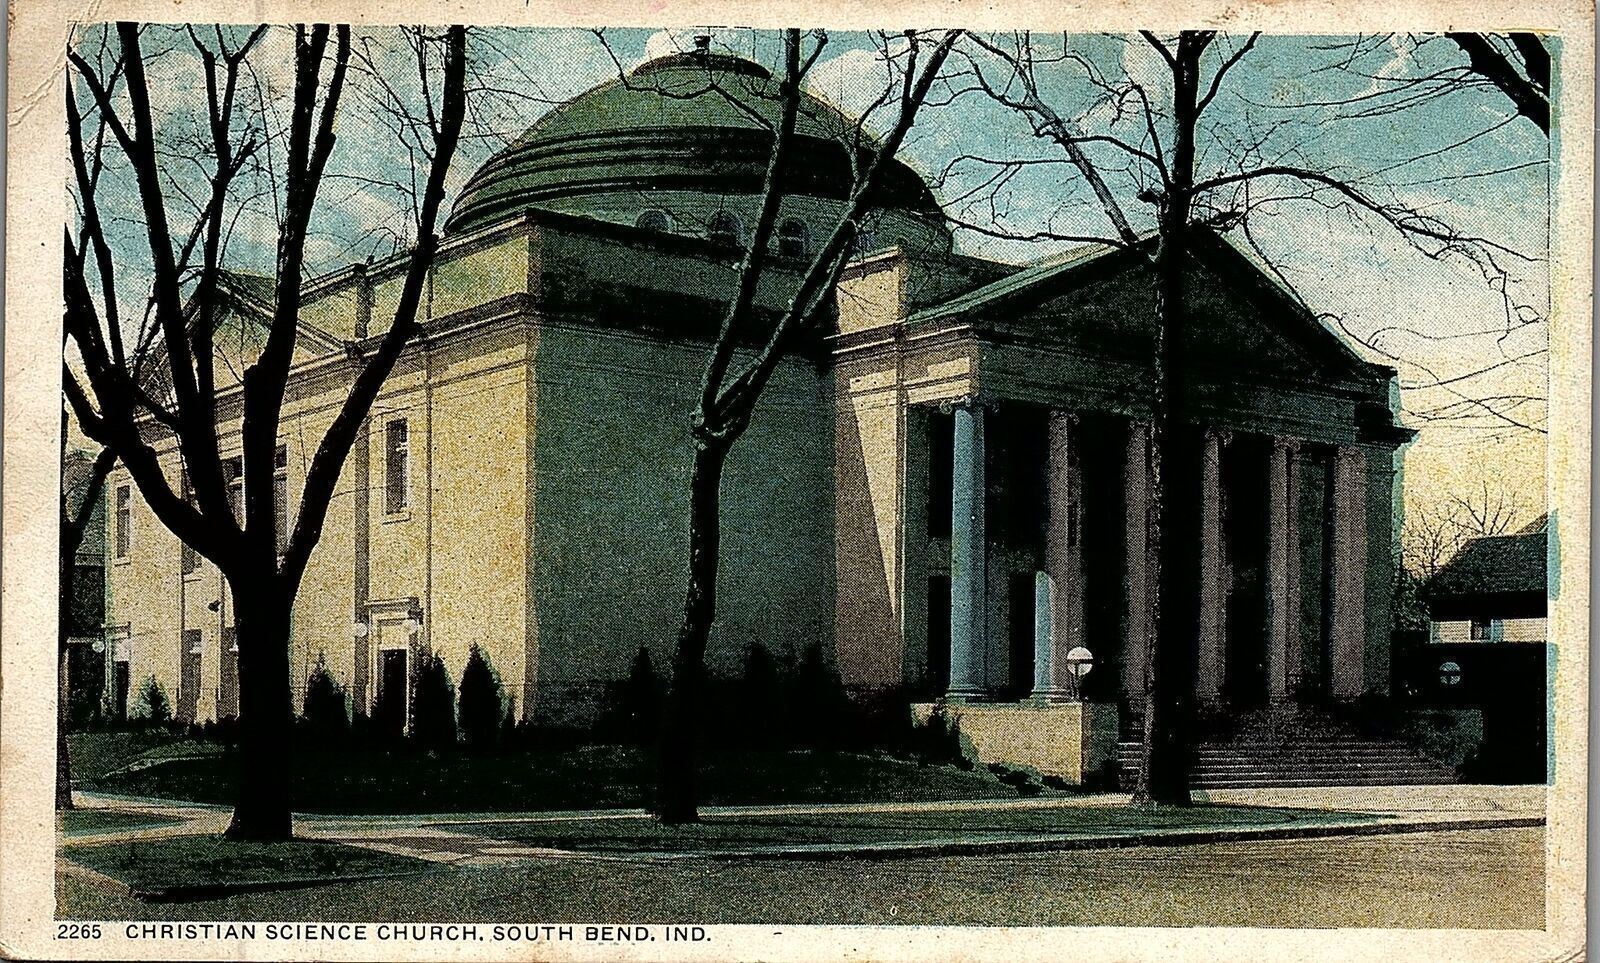 1923 SOUTH BEND INDIANA CHRISTIAN SCIENCE CHURCH EARLY UNDIVIDED POSTCARD 26-151